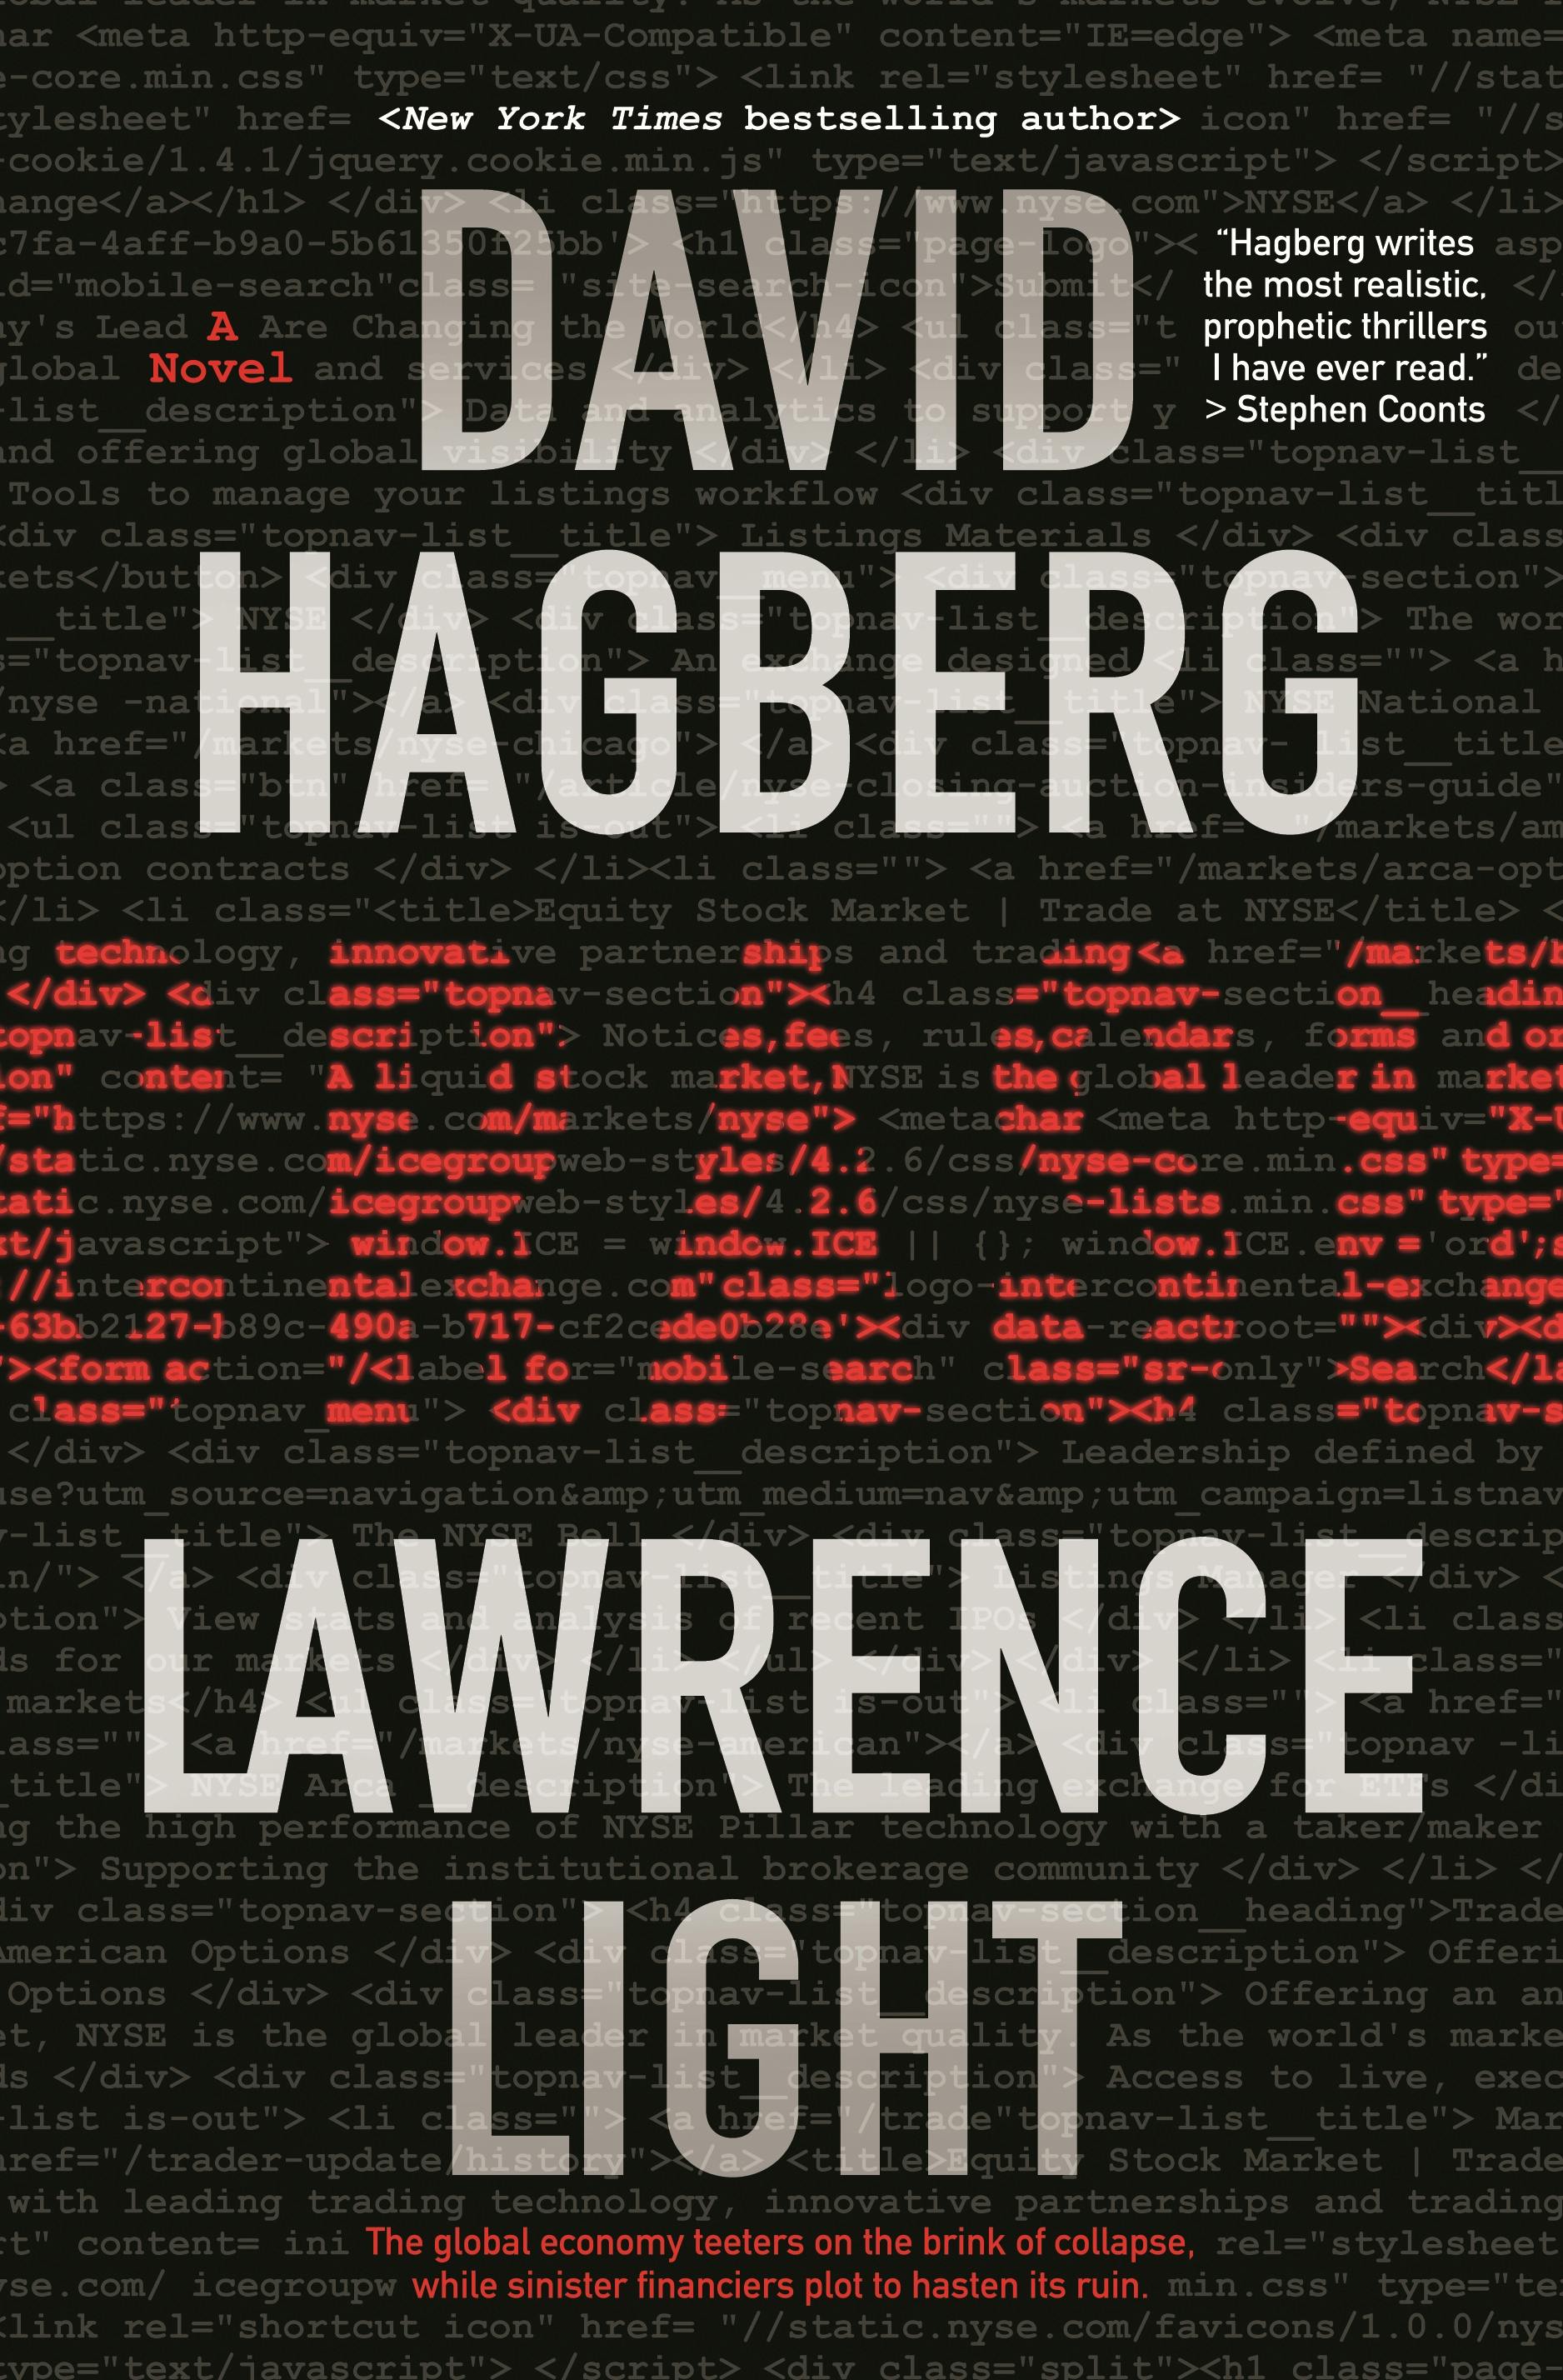 Cover for the book titled as: Crash